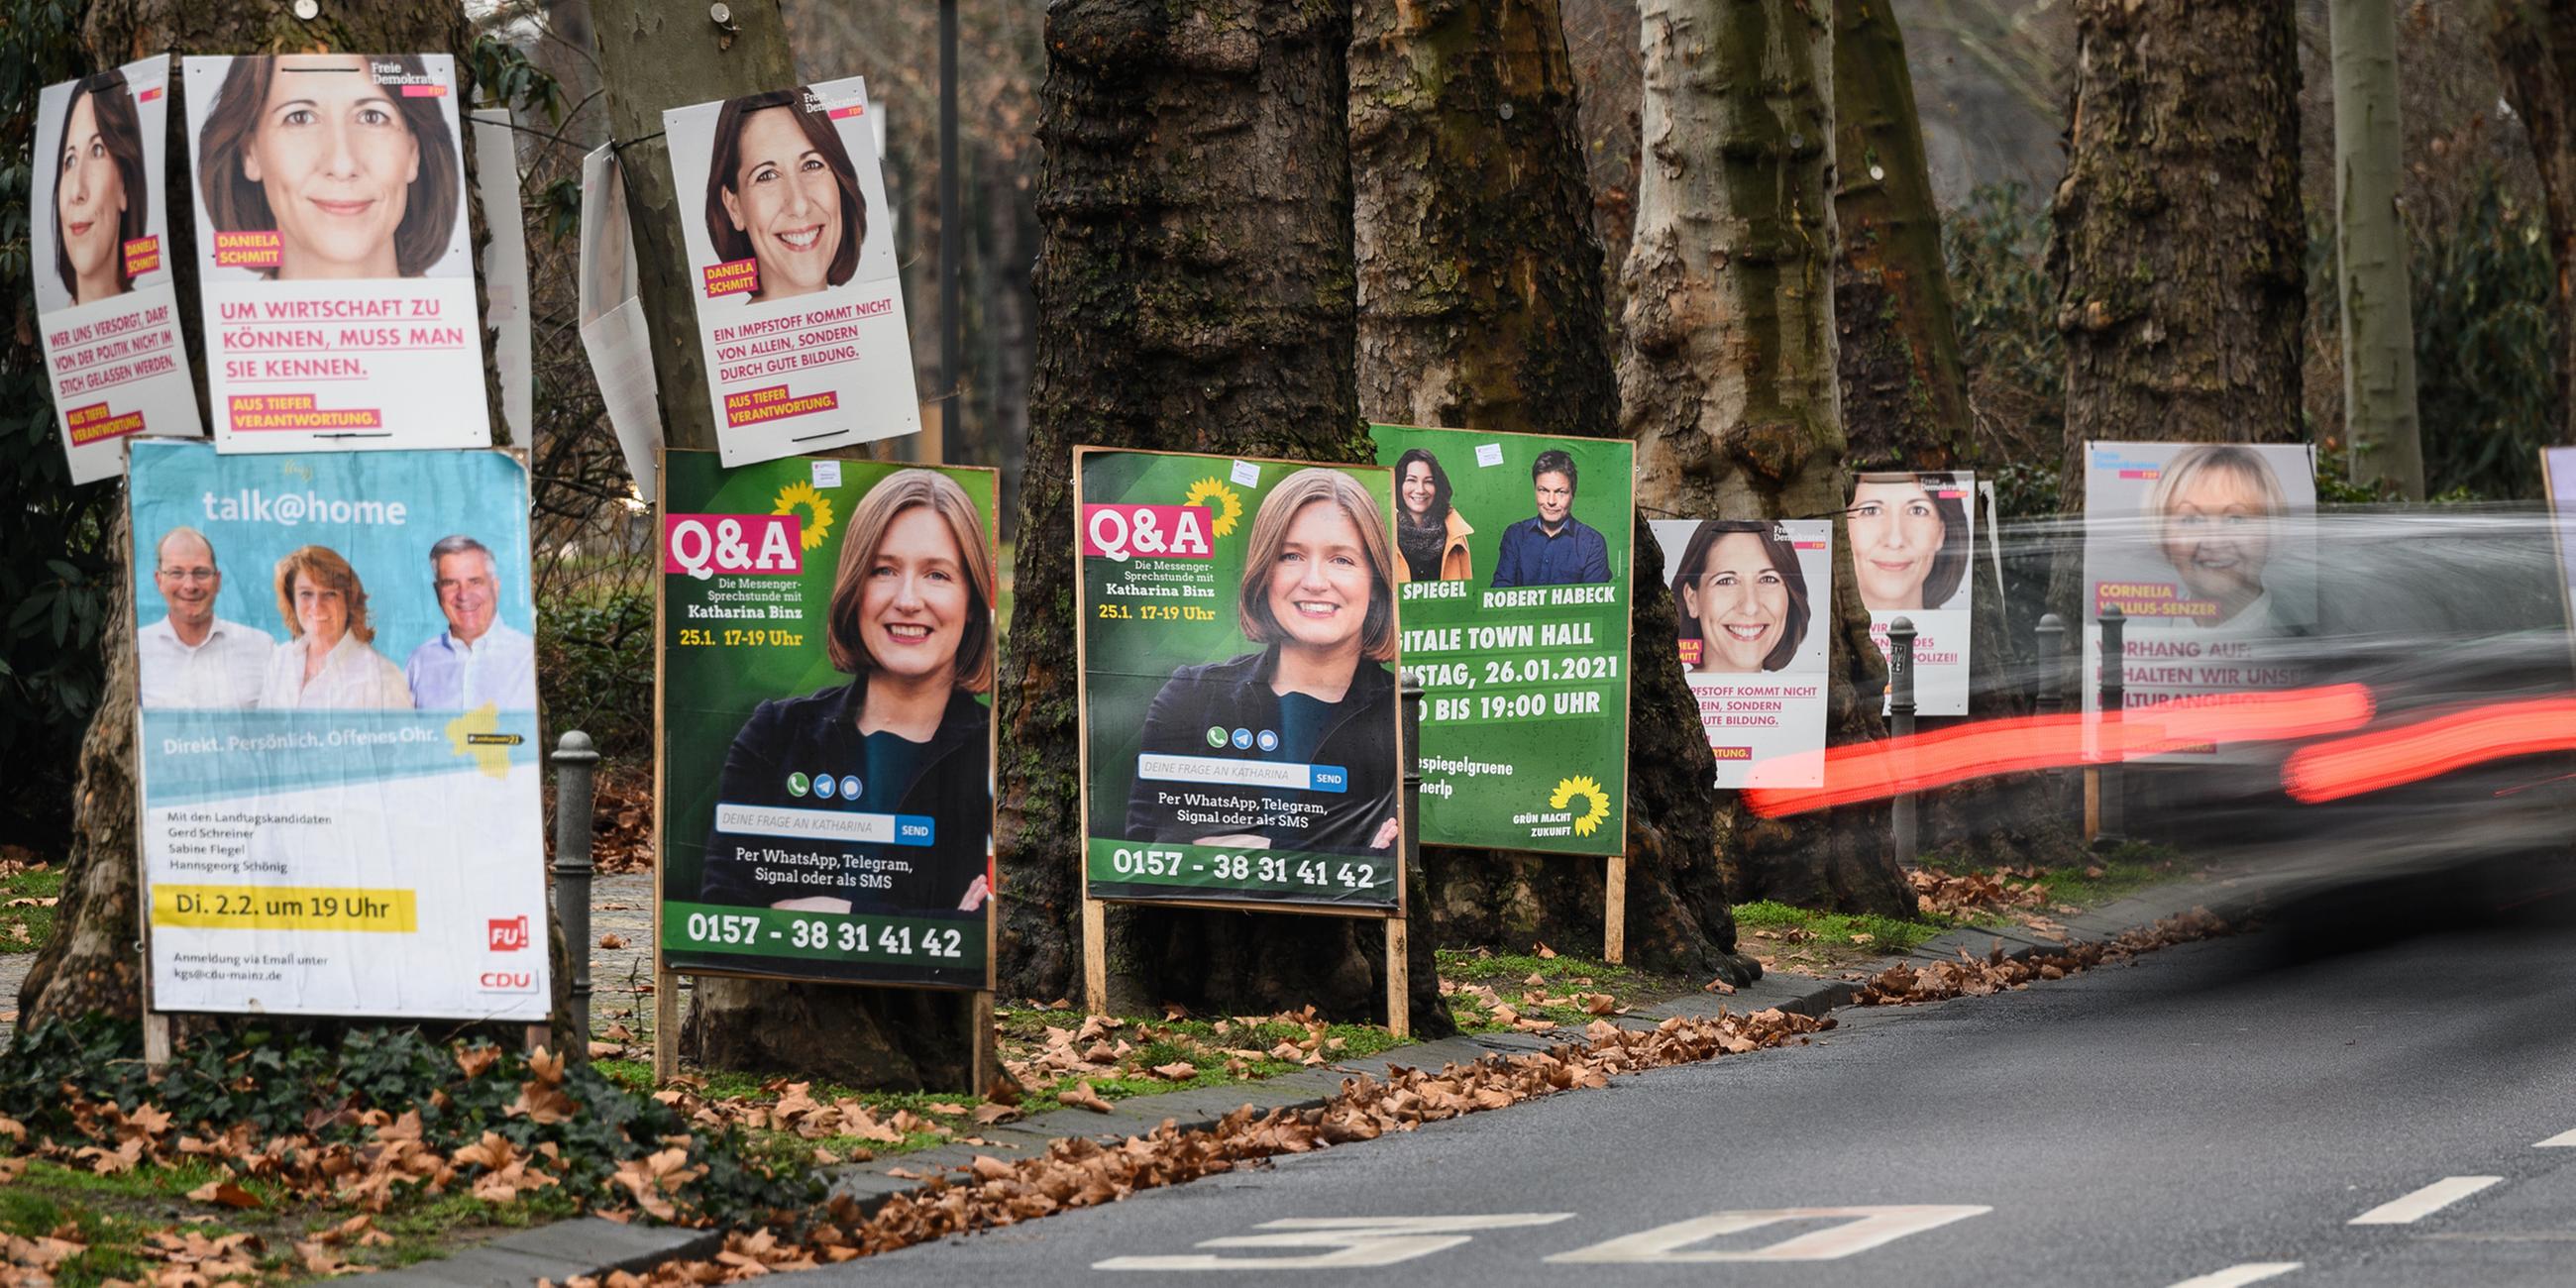 Wahlplakate in Maionz am 25.01.2021